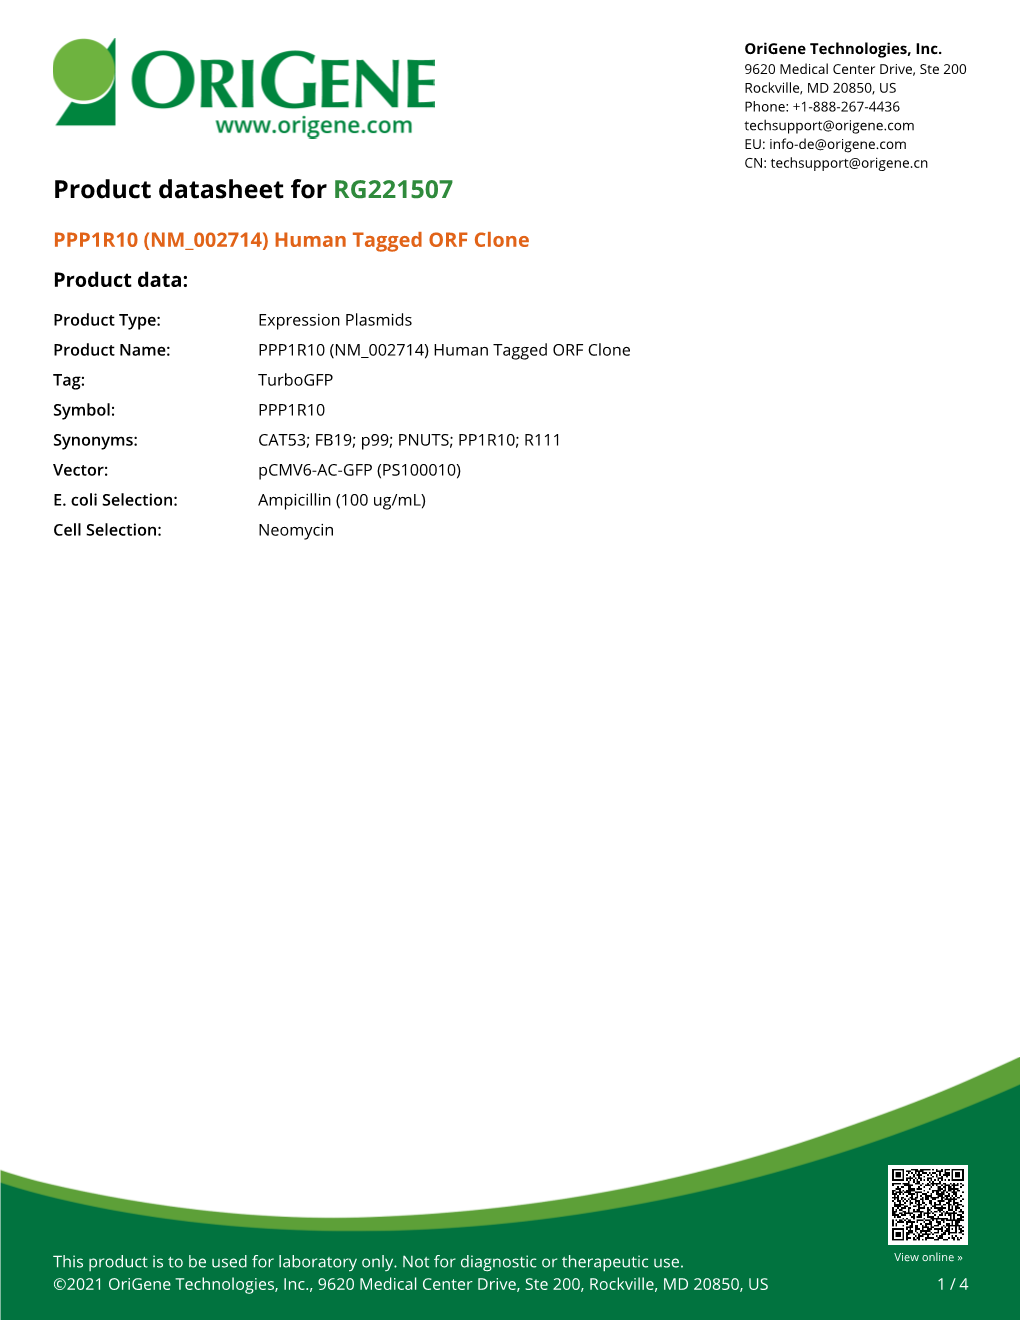 PPP1R10 (NM 002714) Human Tagged ORF Clone Product Data